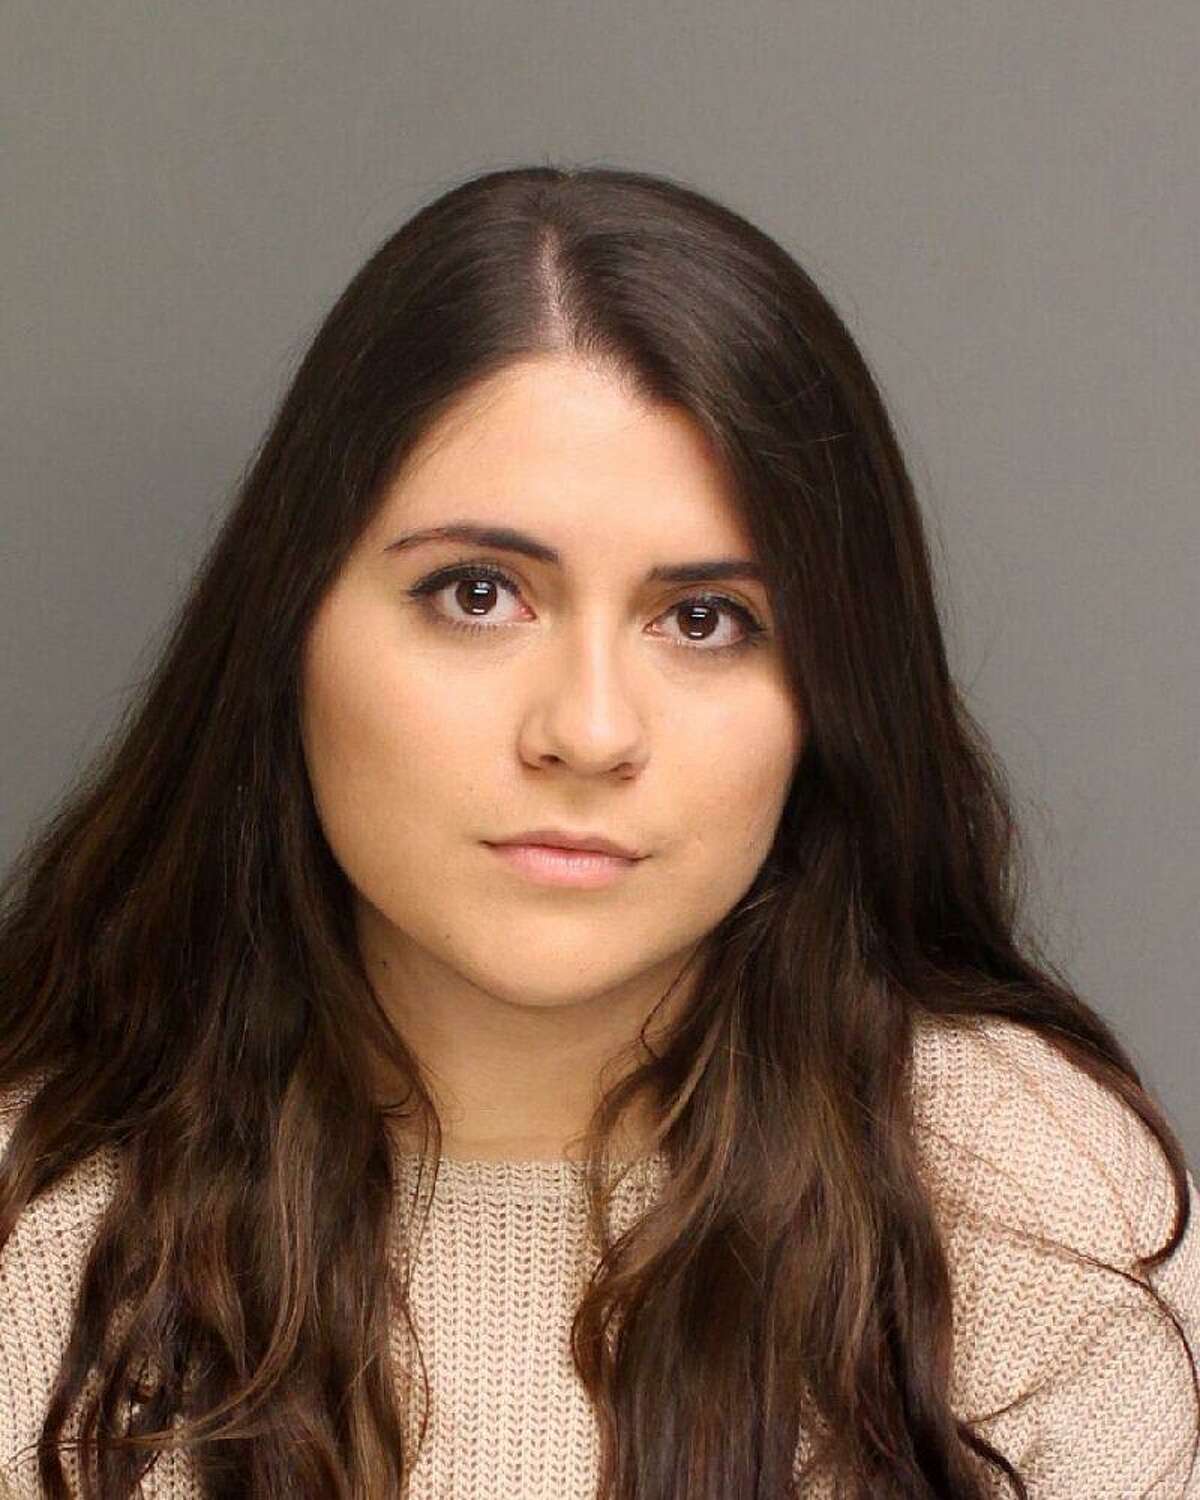 Nikki Yovino, of South Setauket, N.Y., was convicted of falsely claiming she was sexually assaulted by two Sacred Hearst University students.